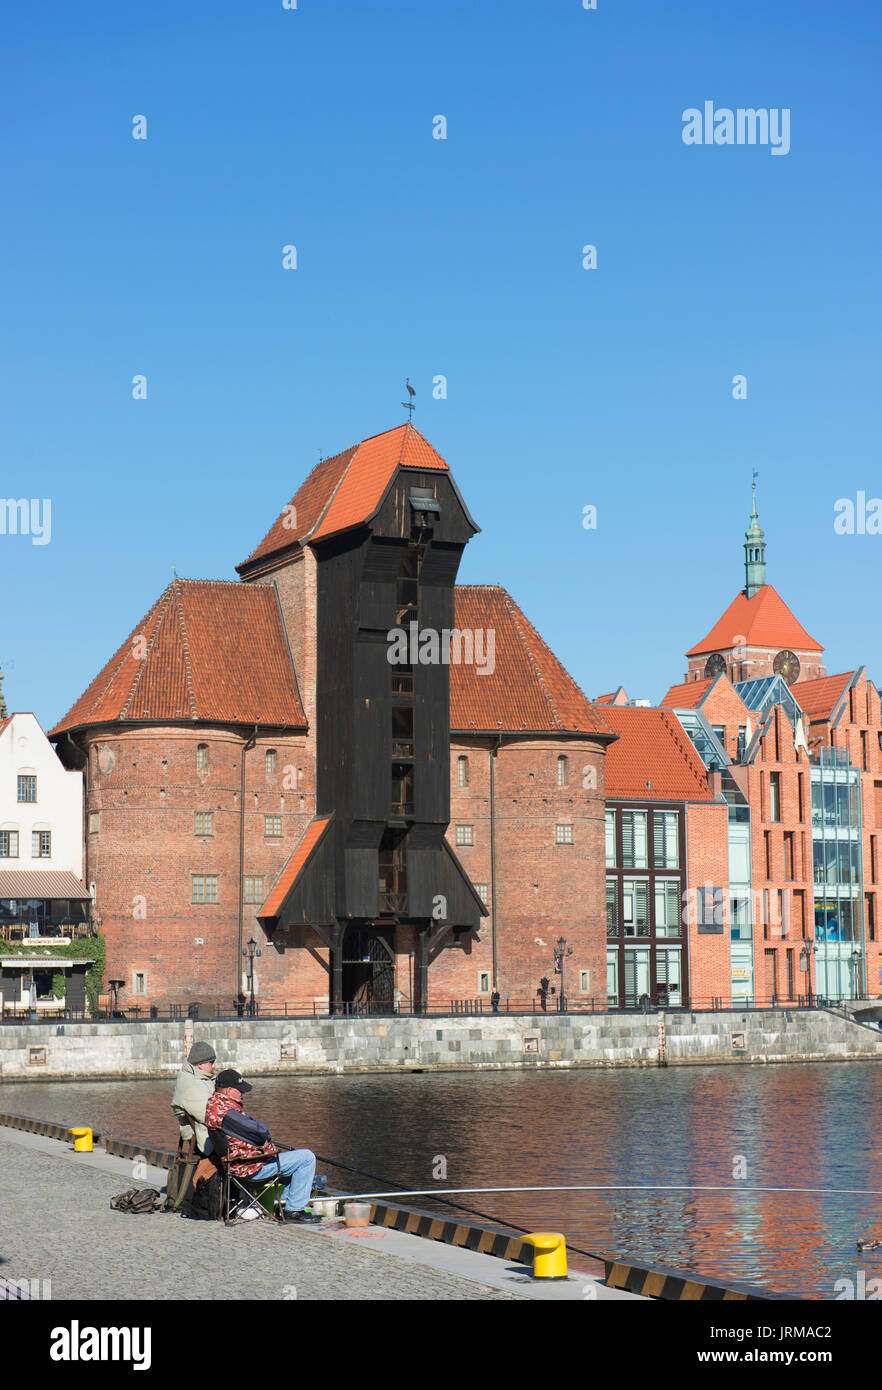 Fishermen try their luck on the canal in Gdansk's Old Town with the Gdansk medieval Port Crane in the background. Stock Photo